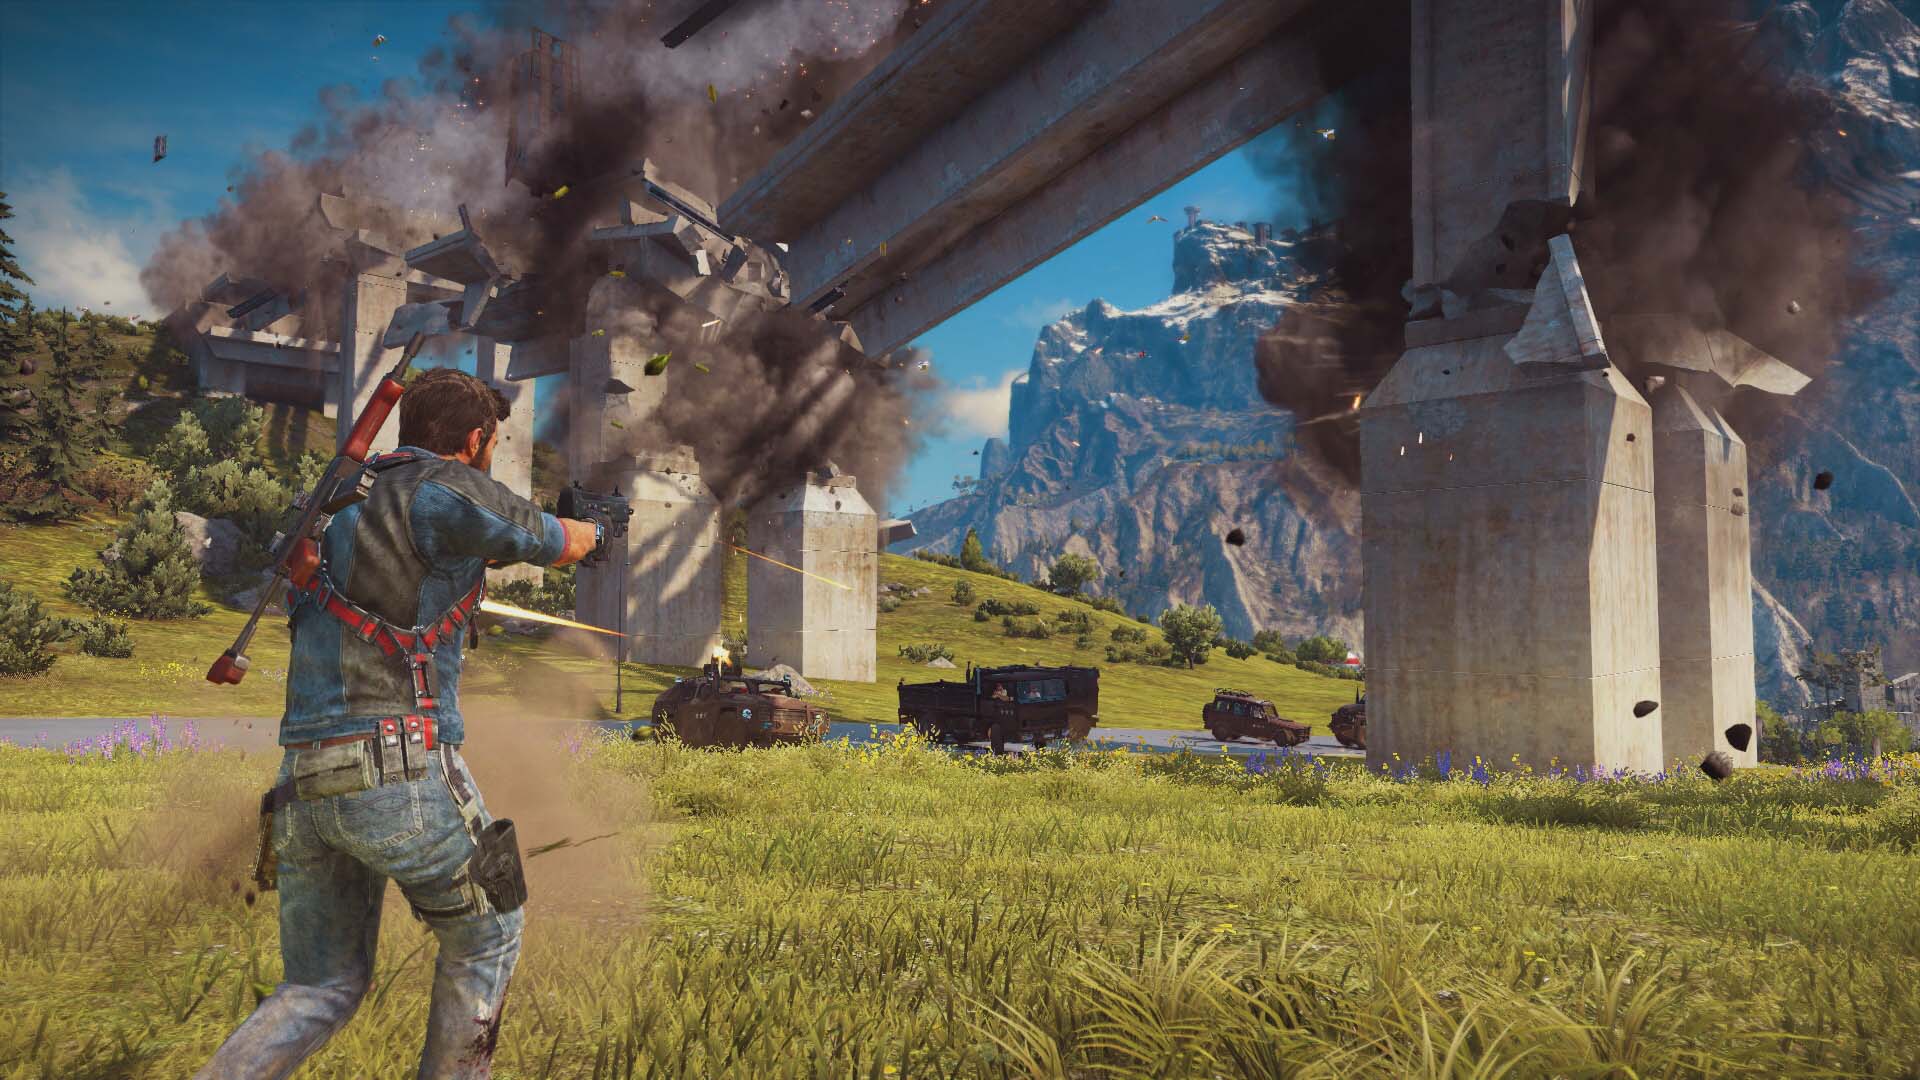 Fun game 3. Игра just cause 3. Just cause 3 геймплей. Just cause 3 Gameplay. Just cause 3 XL Edition.